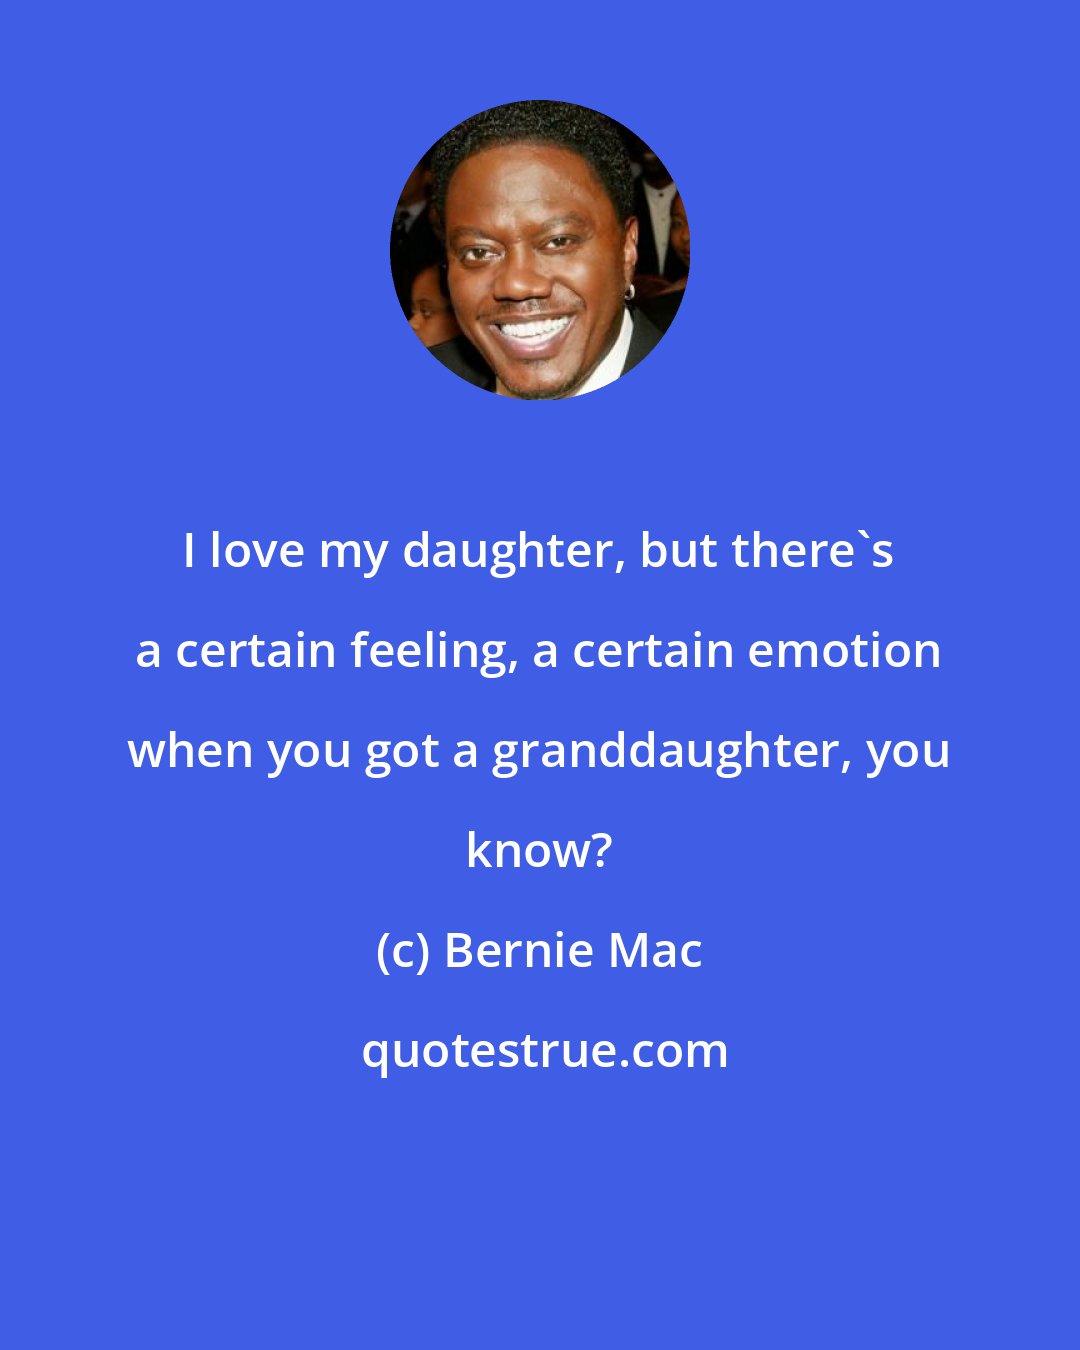 Bernie Mac: I love my daughter, but there's a certain feeling, a certain emotion when you got a granddaughter, you know?